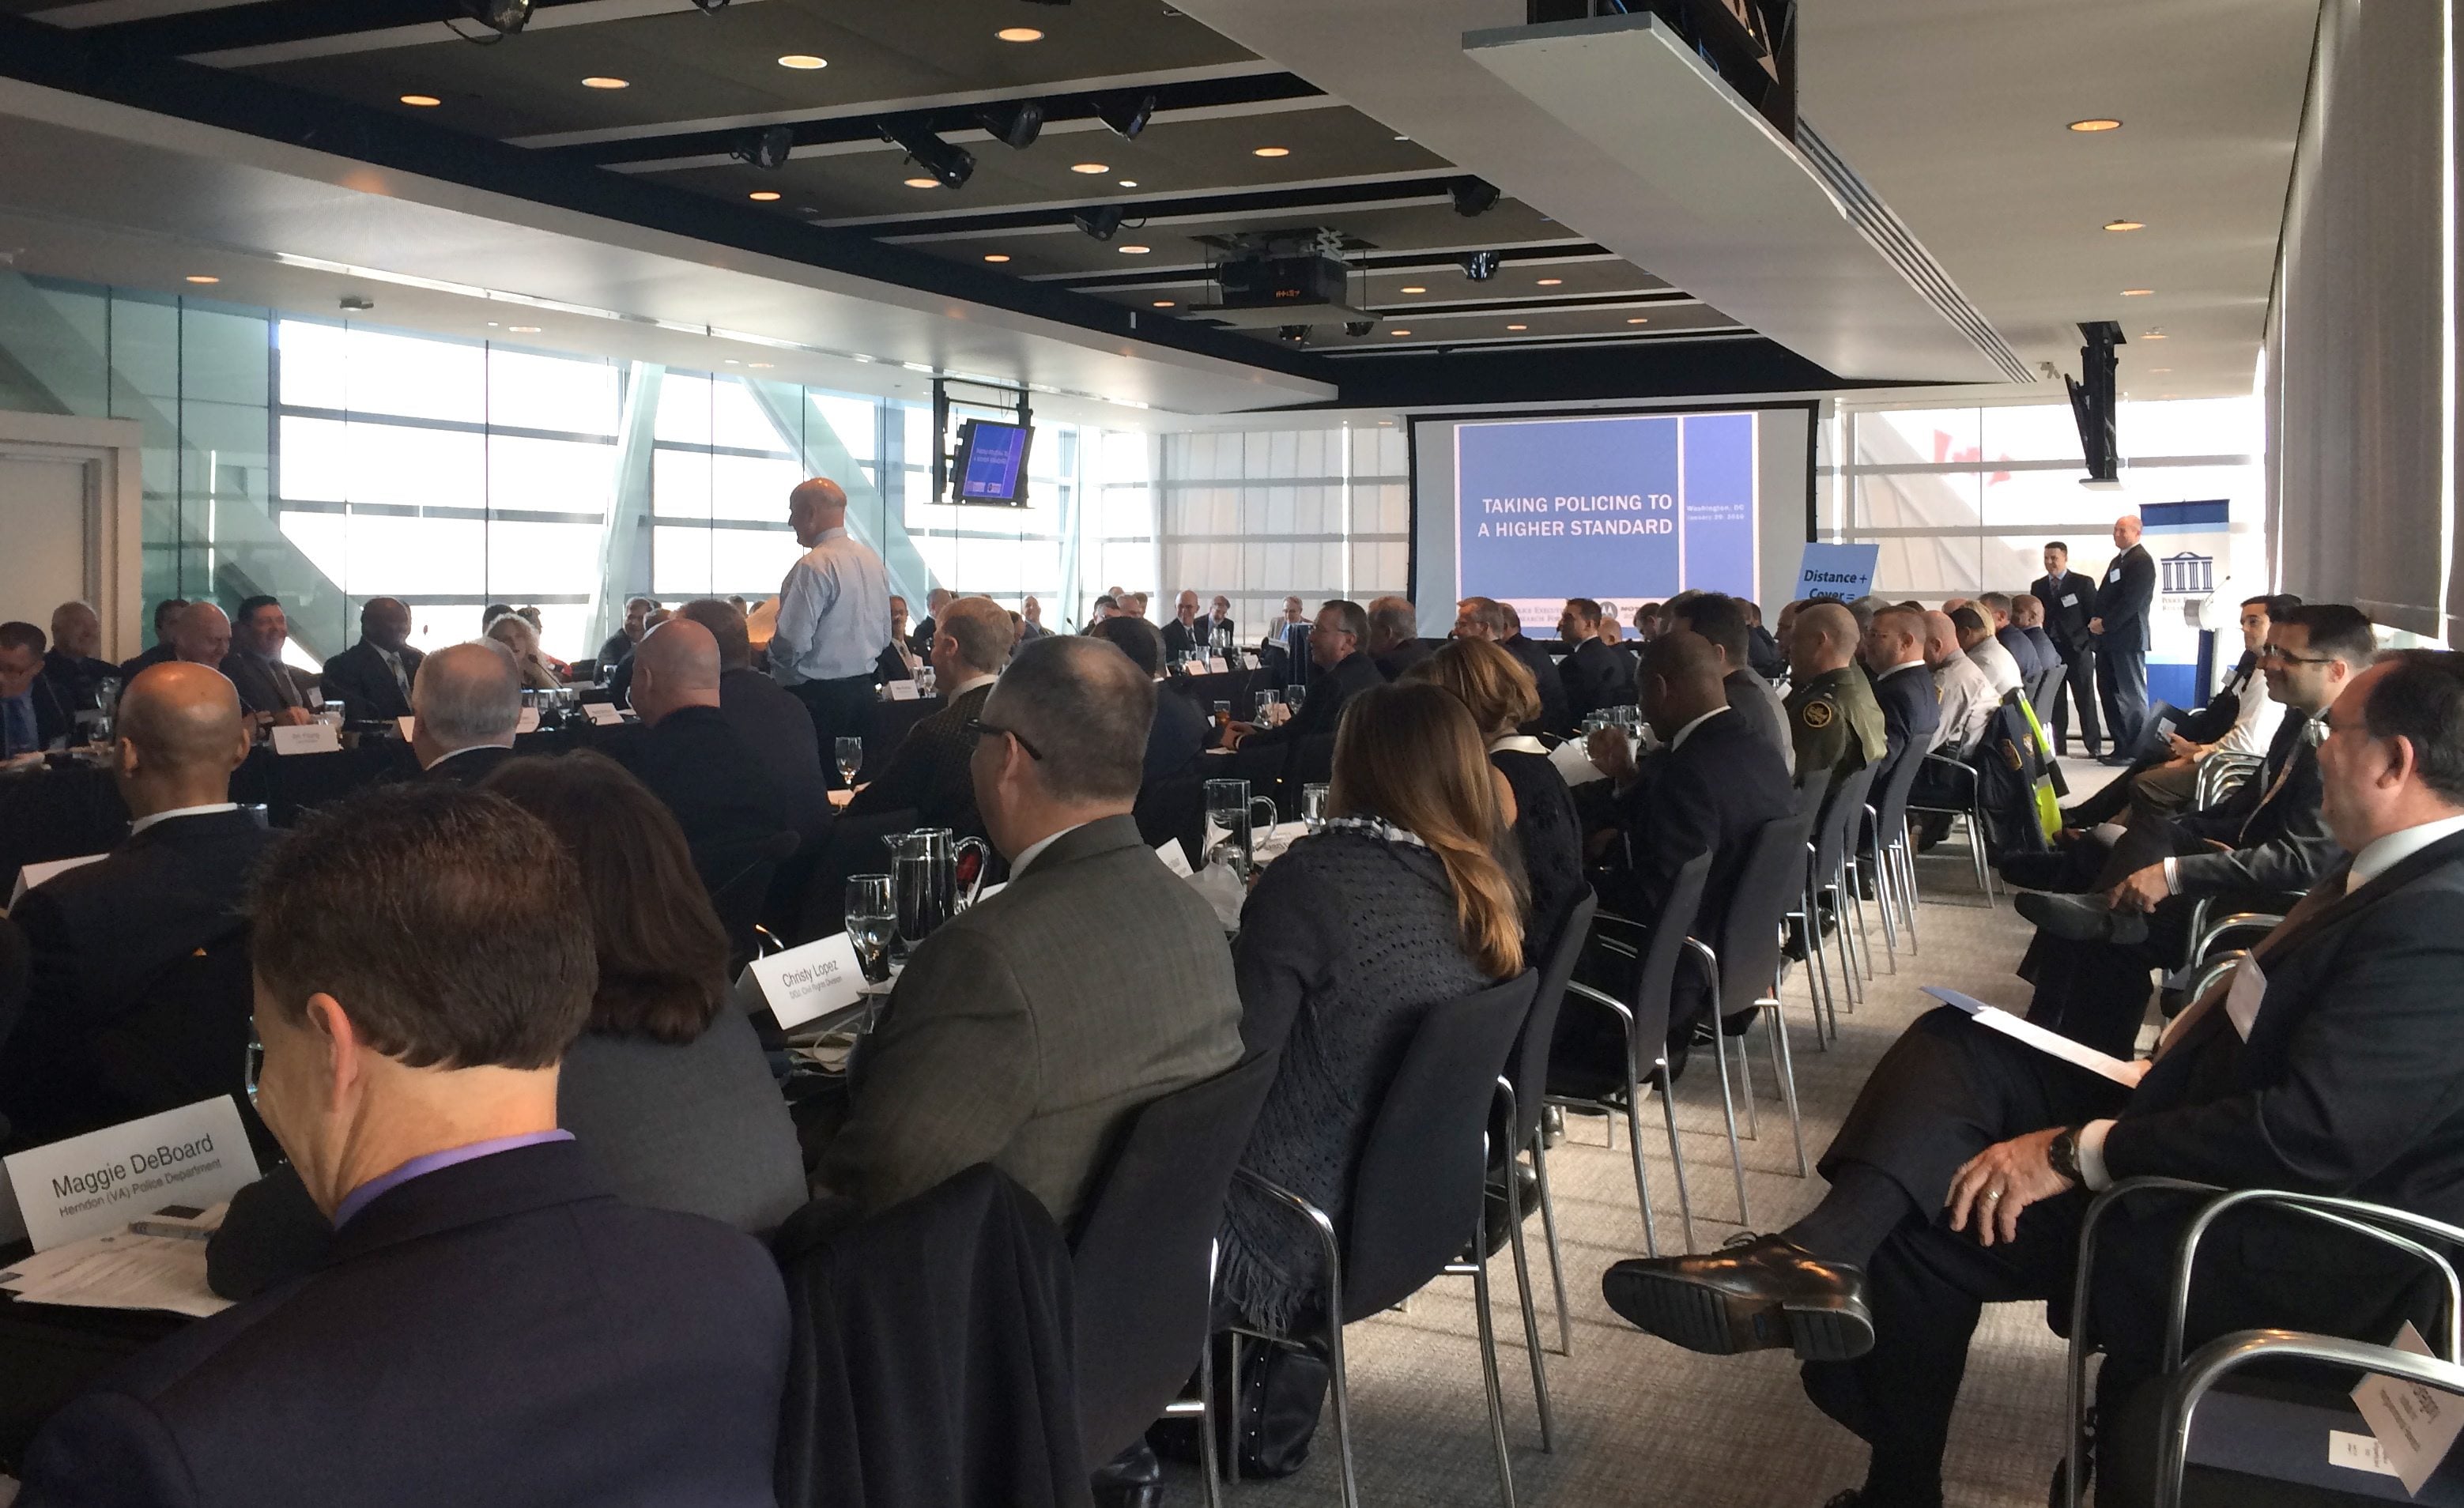 Nearly 200 law enforcement leaders gather in Washington, to discuss 30 new guiding principles on when and how police should use force. Police across the United States are rethinking how they use force amid national outrage over questionable shootings and violent arrests.